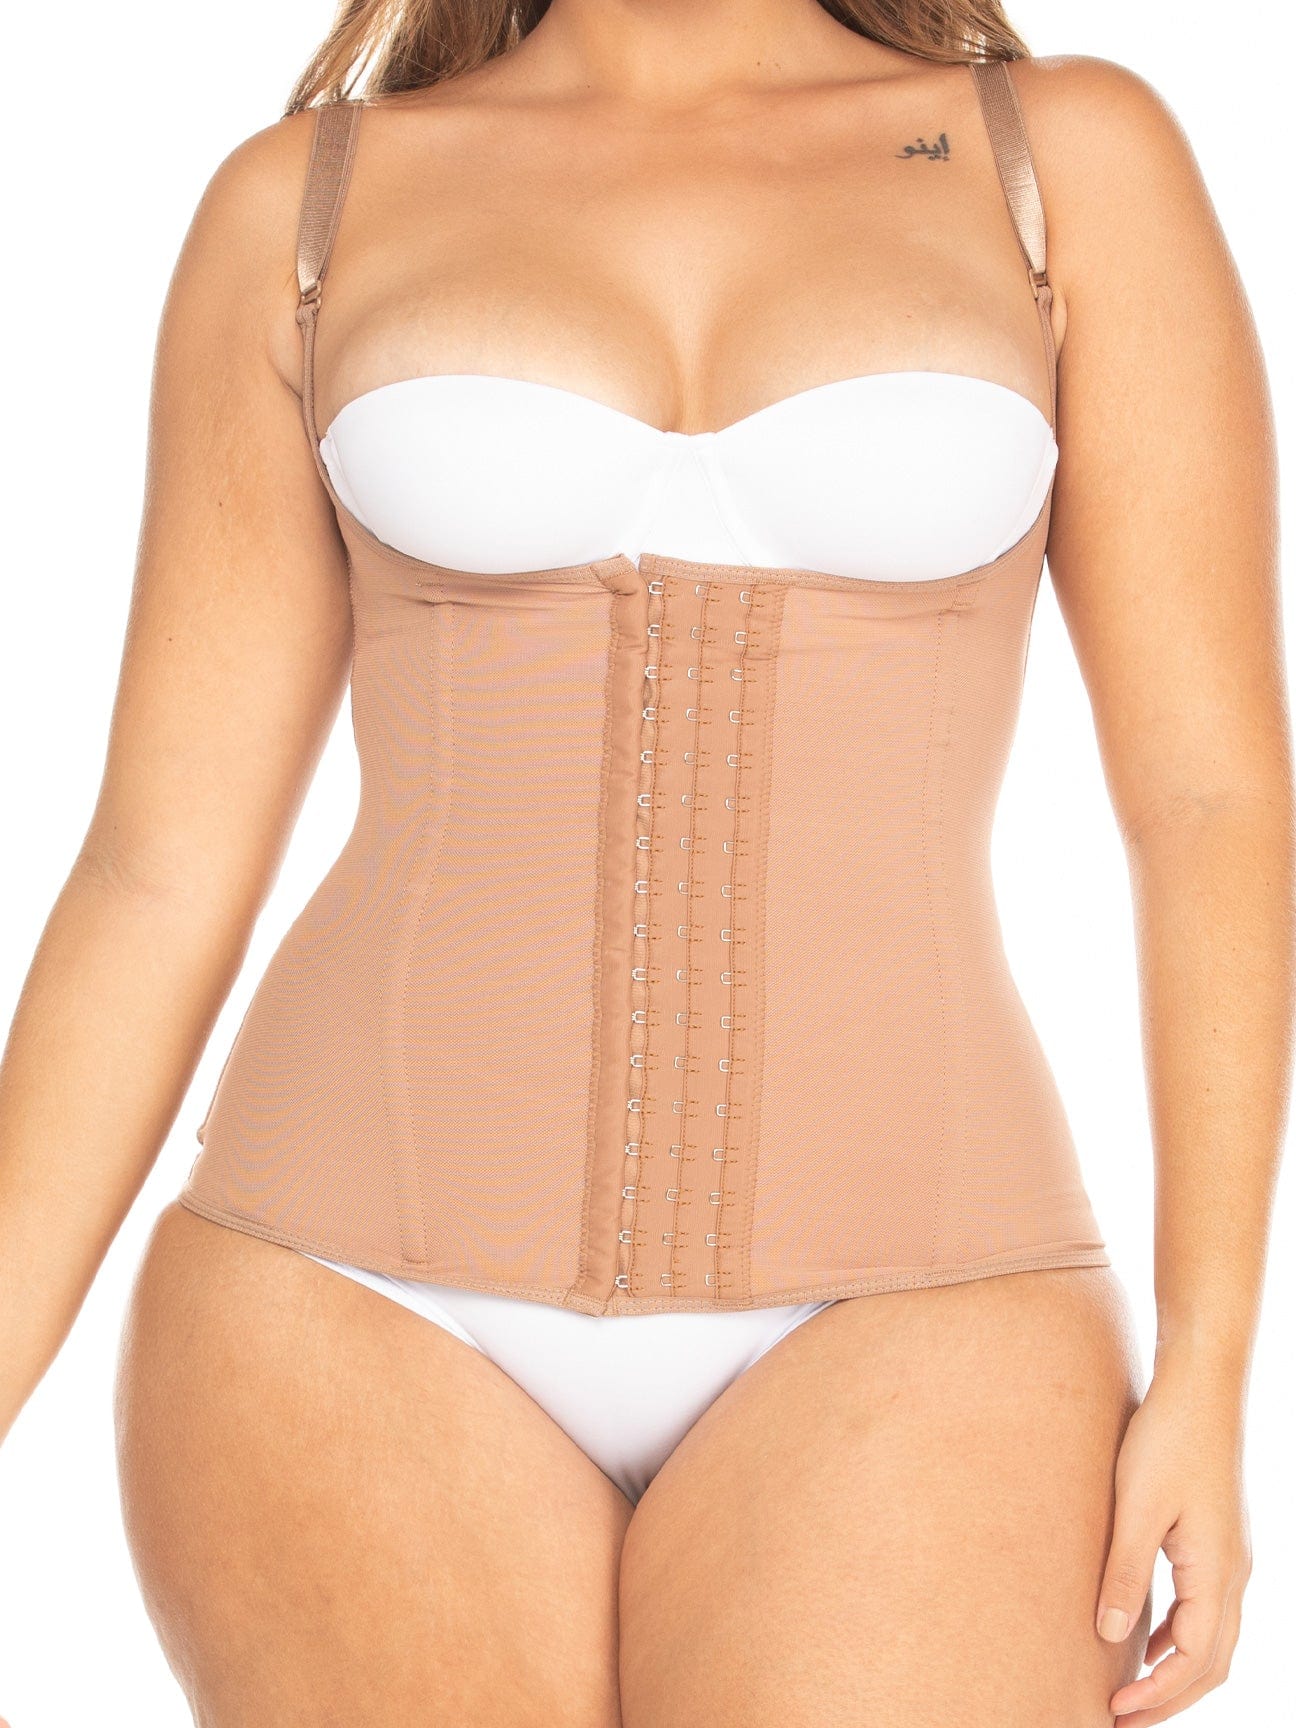 Colombian Fajas Waist Trainer For Women Seamless Butt Shaper, Tummy Control,  Slimming Shapewear With Underwear For Body Shaping 231023 From Wai04, $8.91